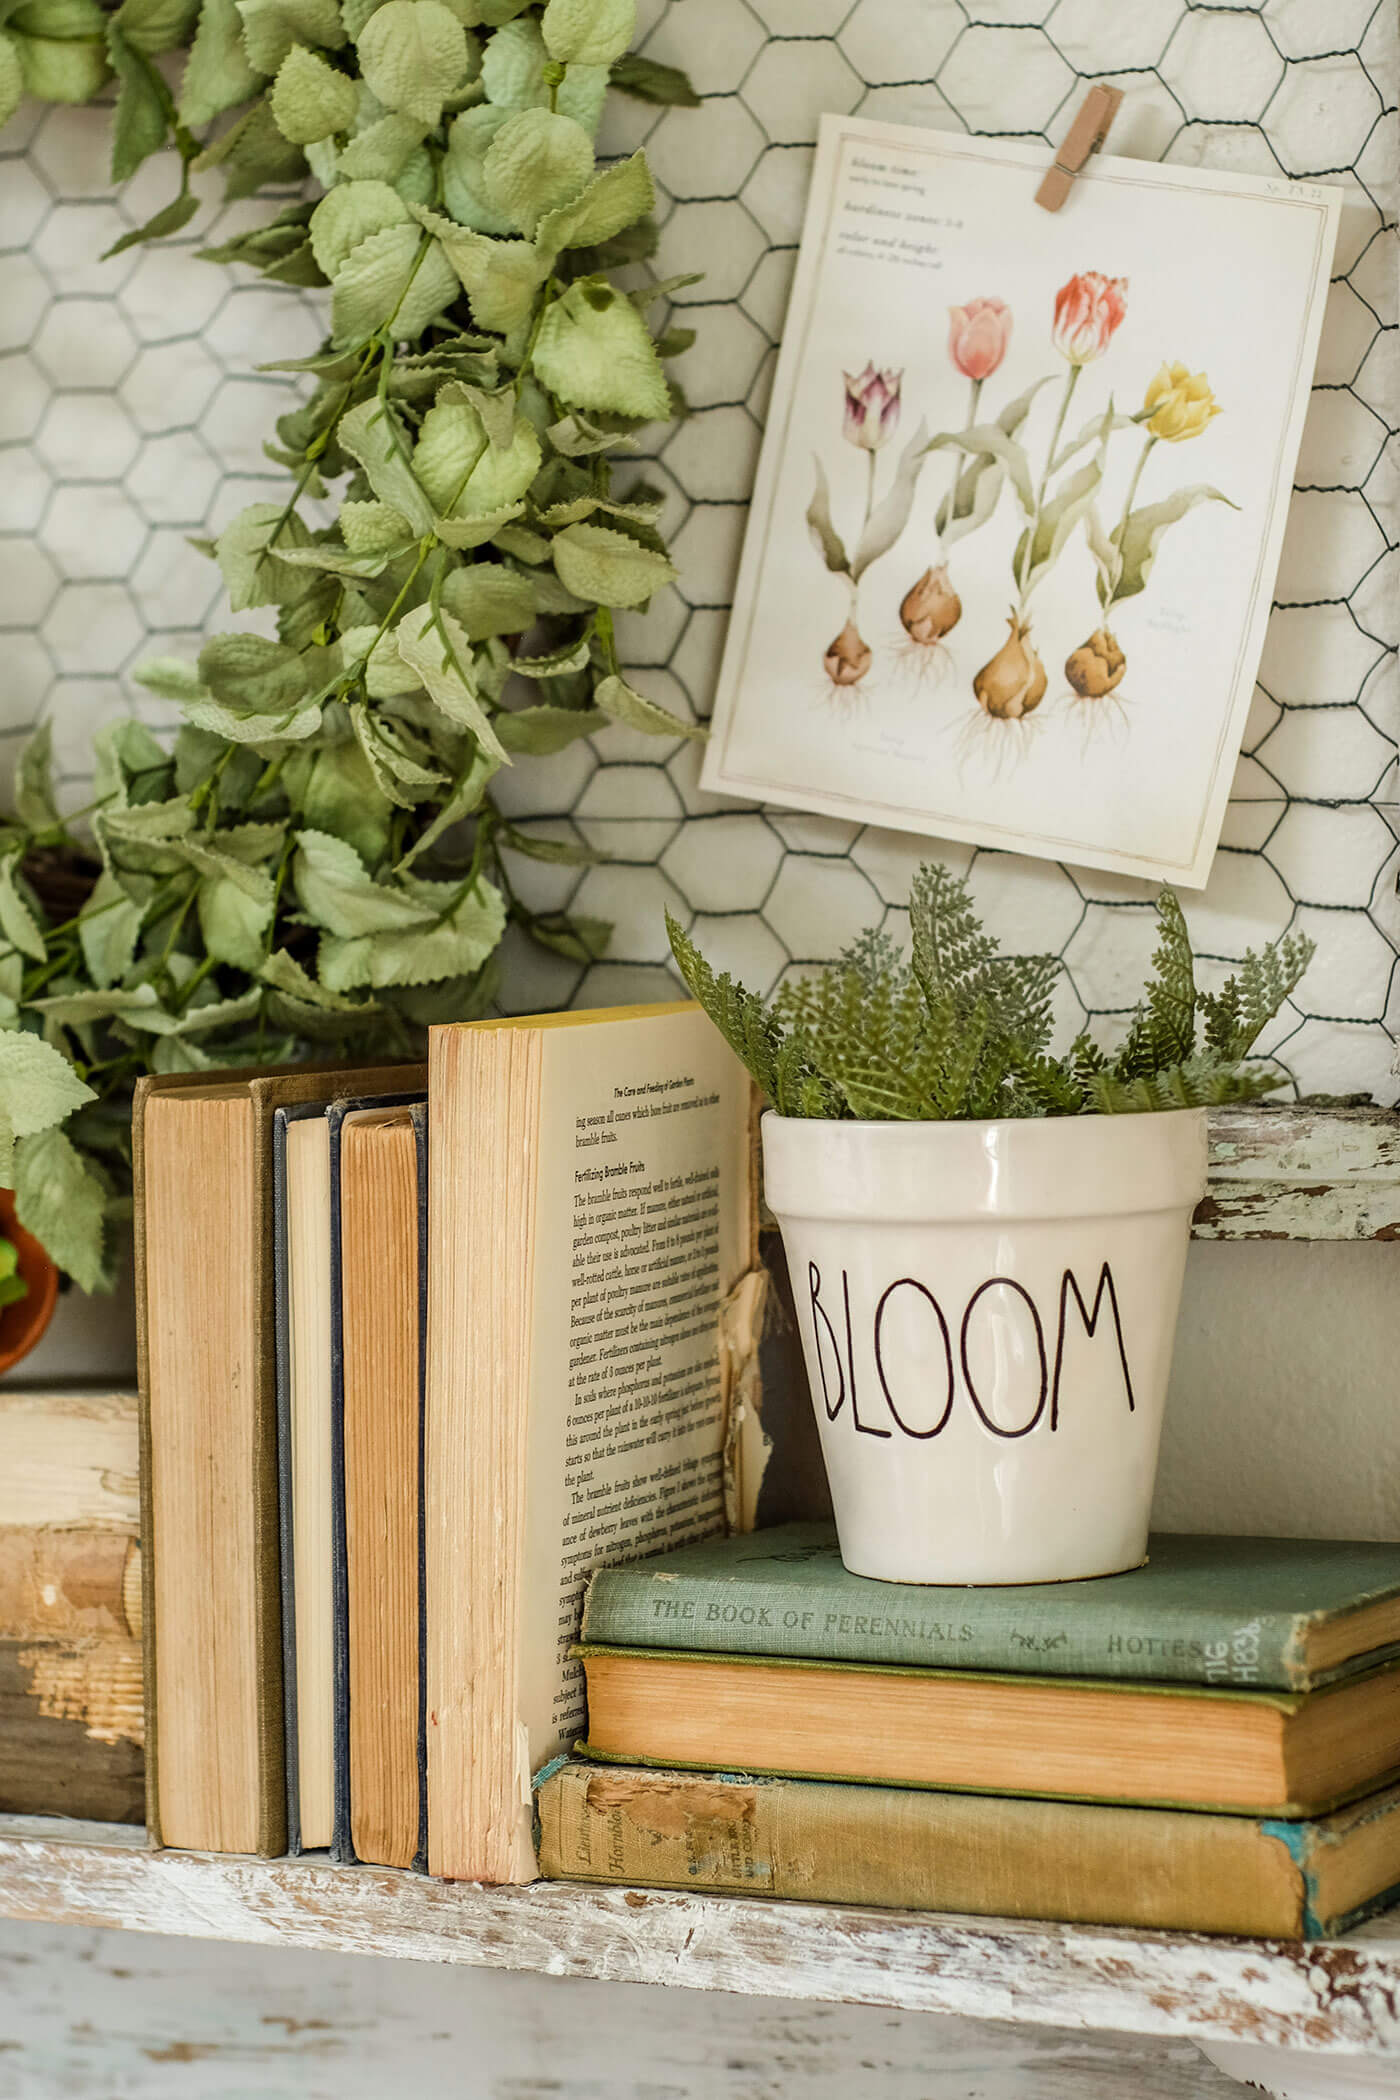 House plants on mantel with vintage books